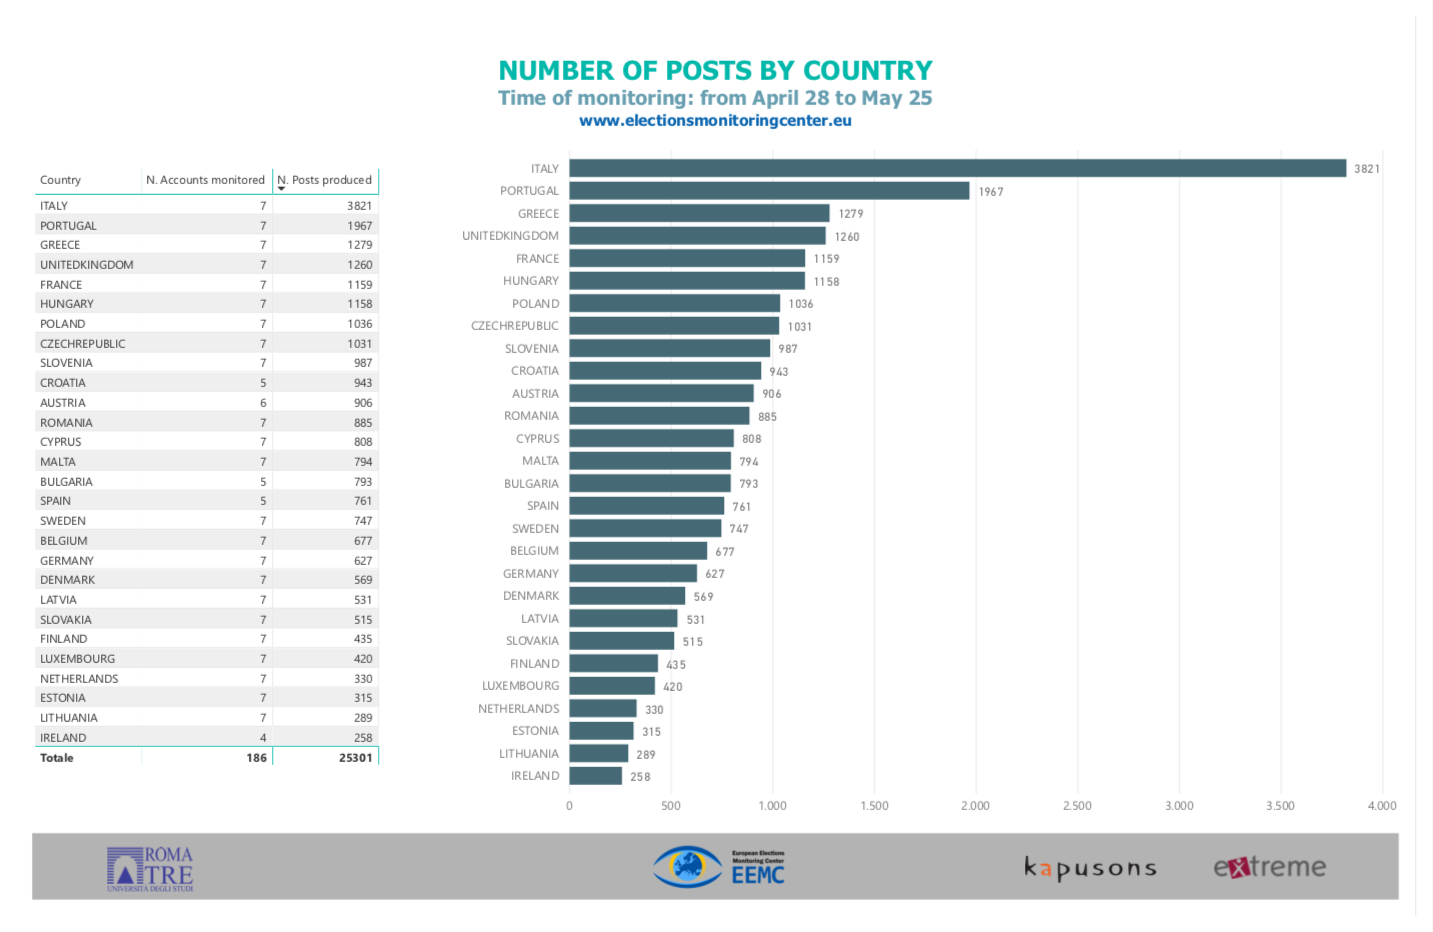 poszts by country